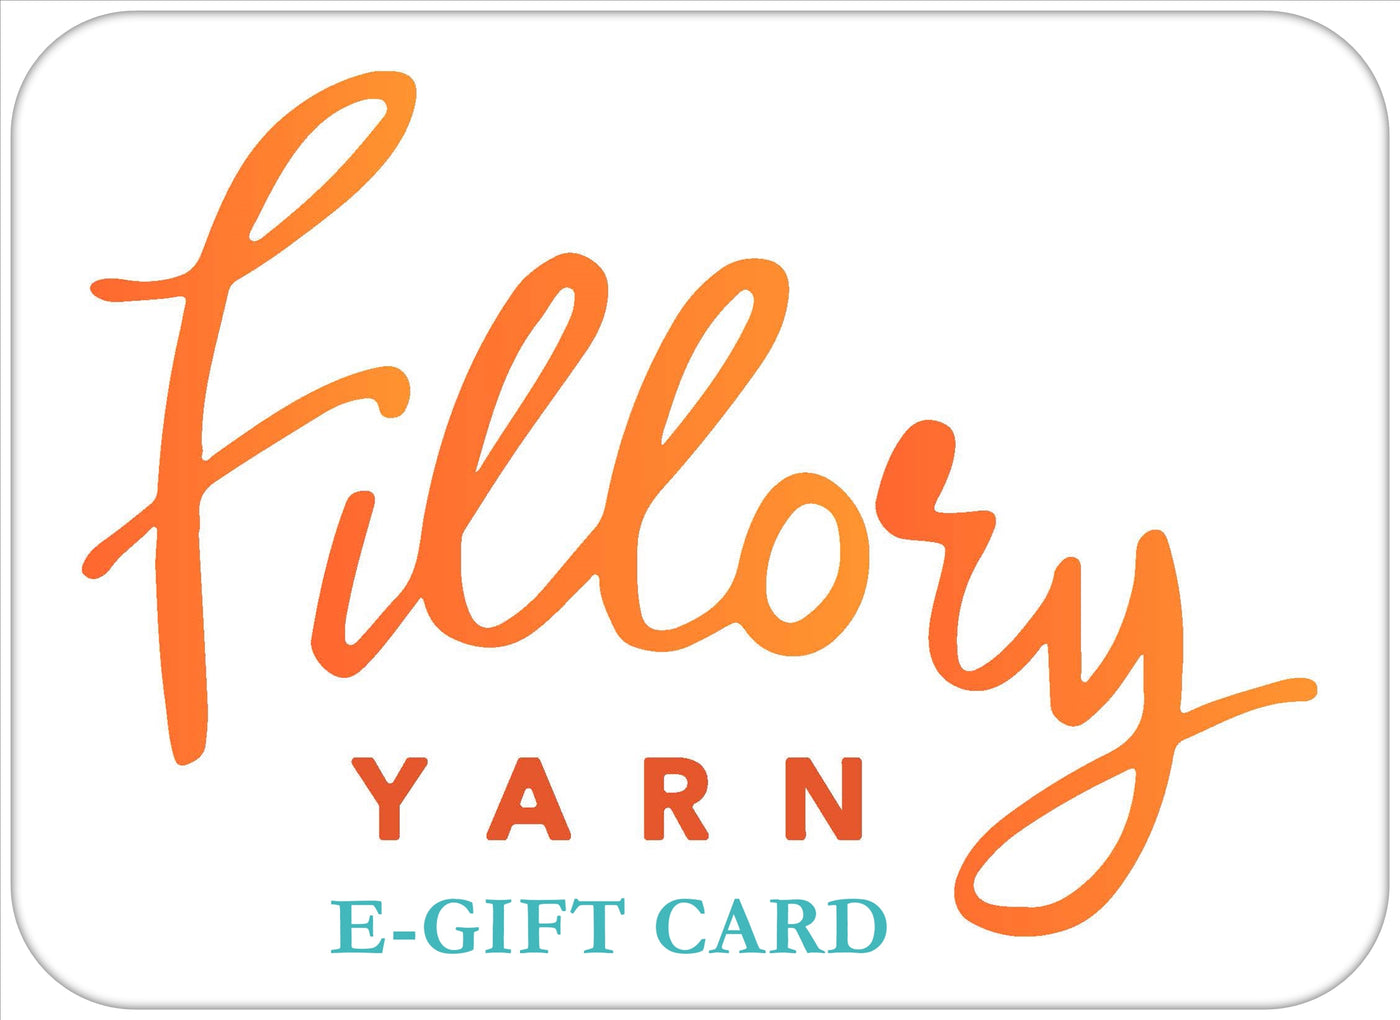 Electronic Gift Card of $75 - Fillory Yarn